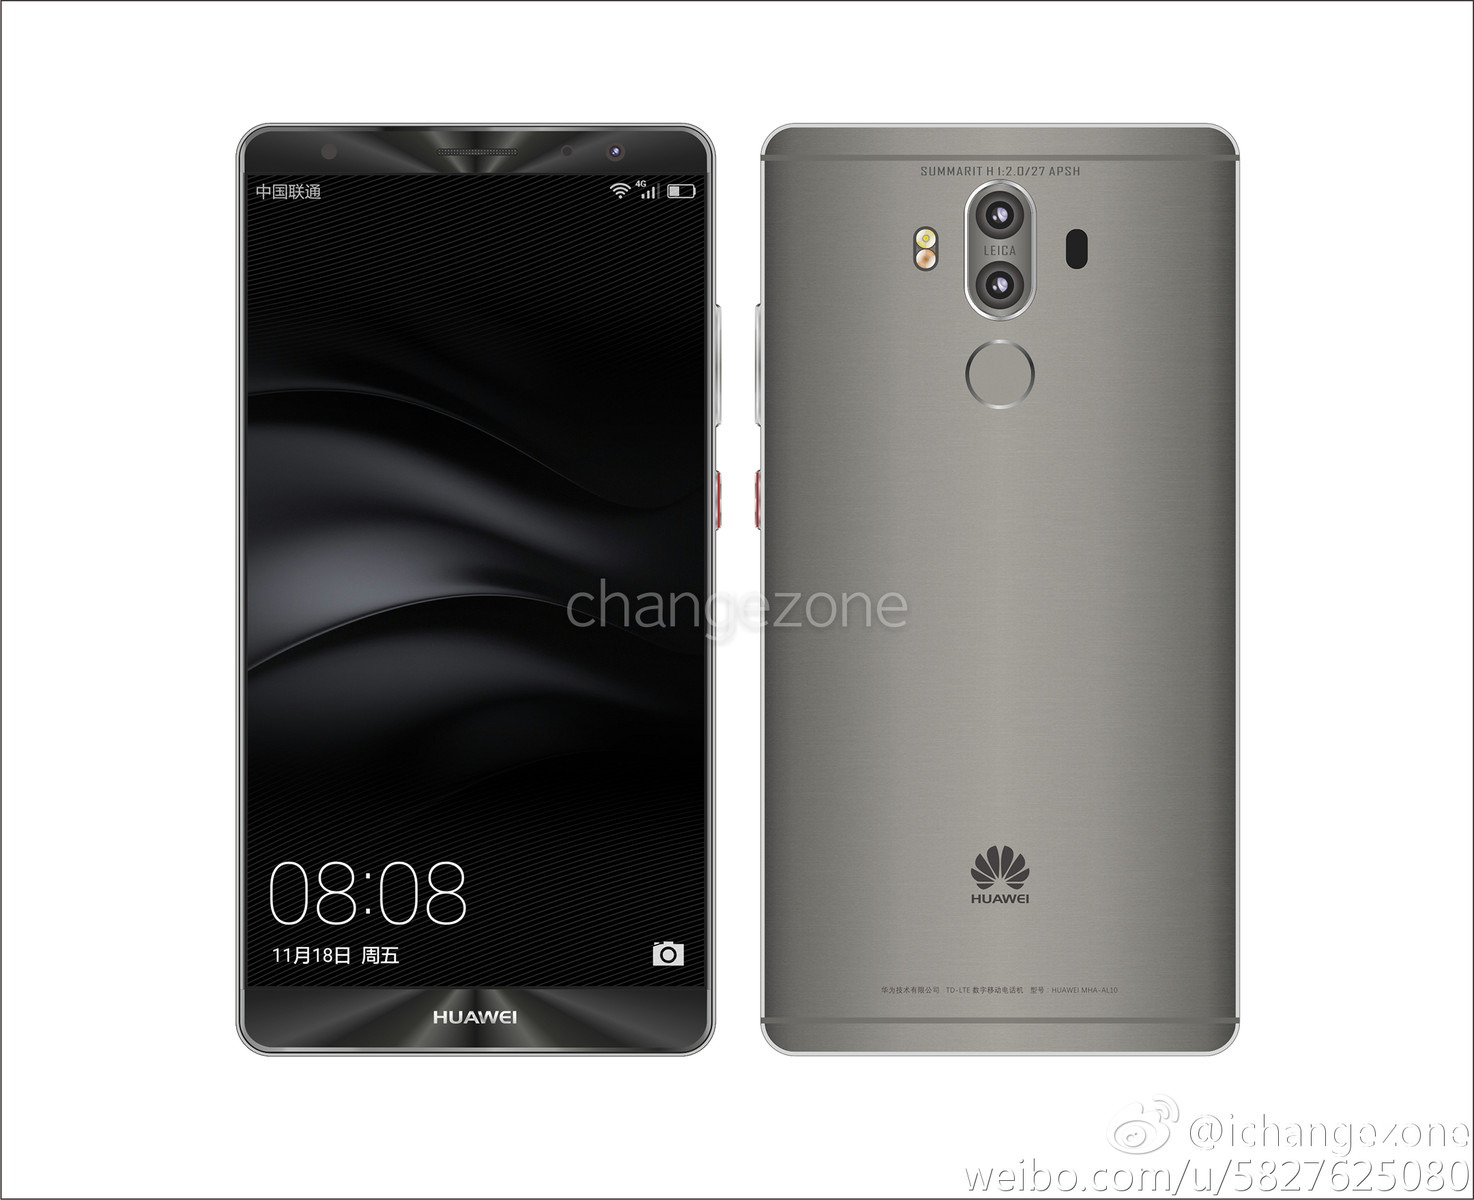 huurling Verward zijn heet Huawei Mate 9 leak: Pictures, pricing and planned configurations -  NotebookCheck.net News